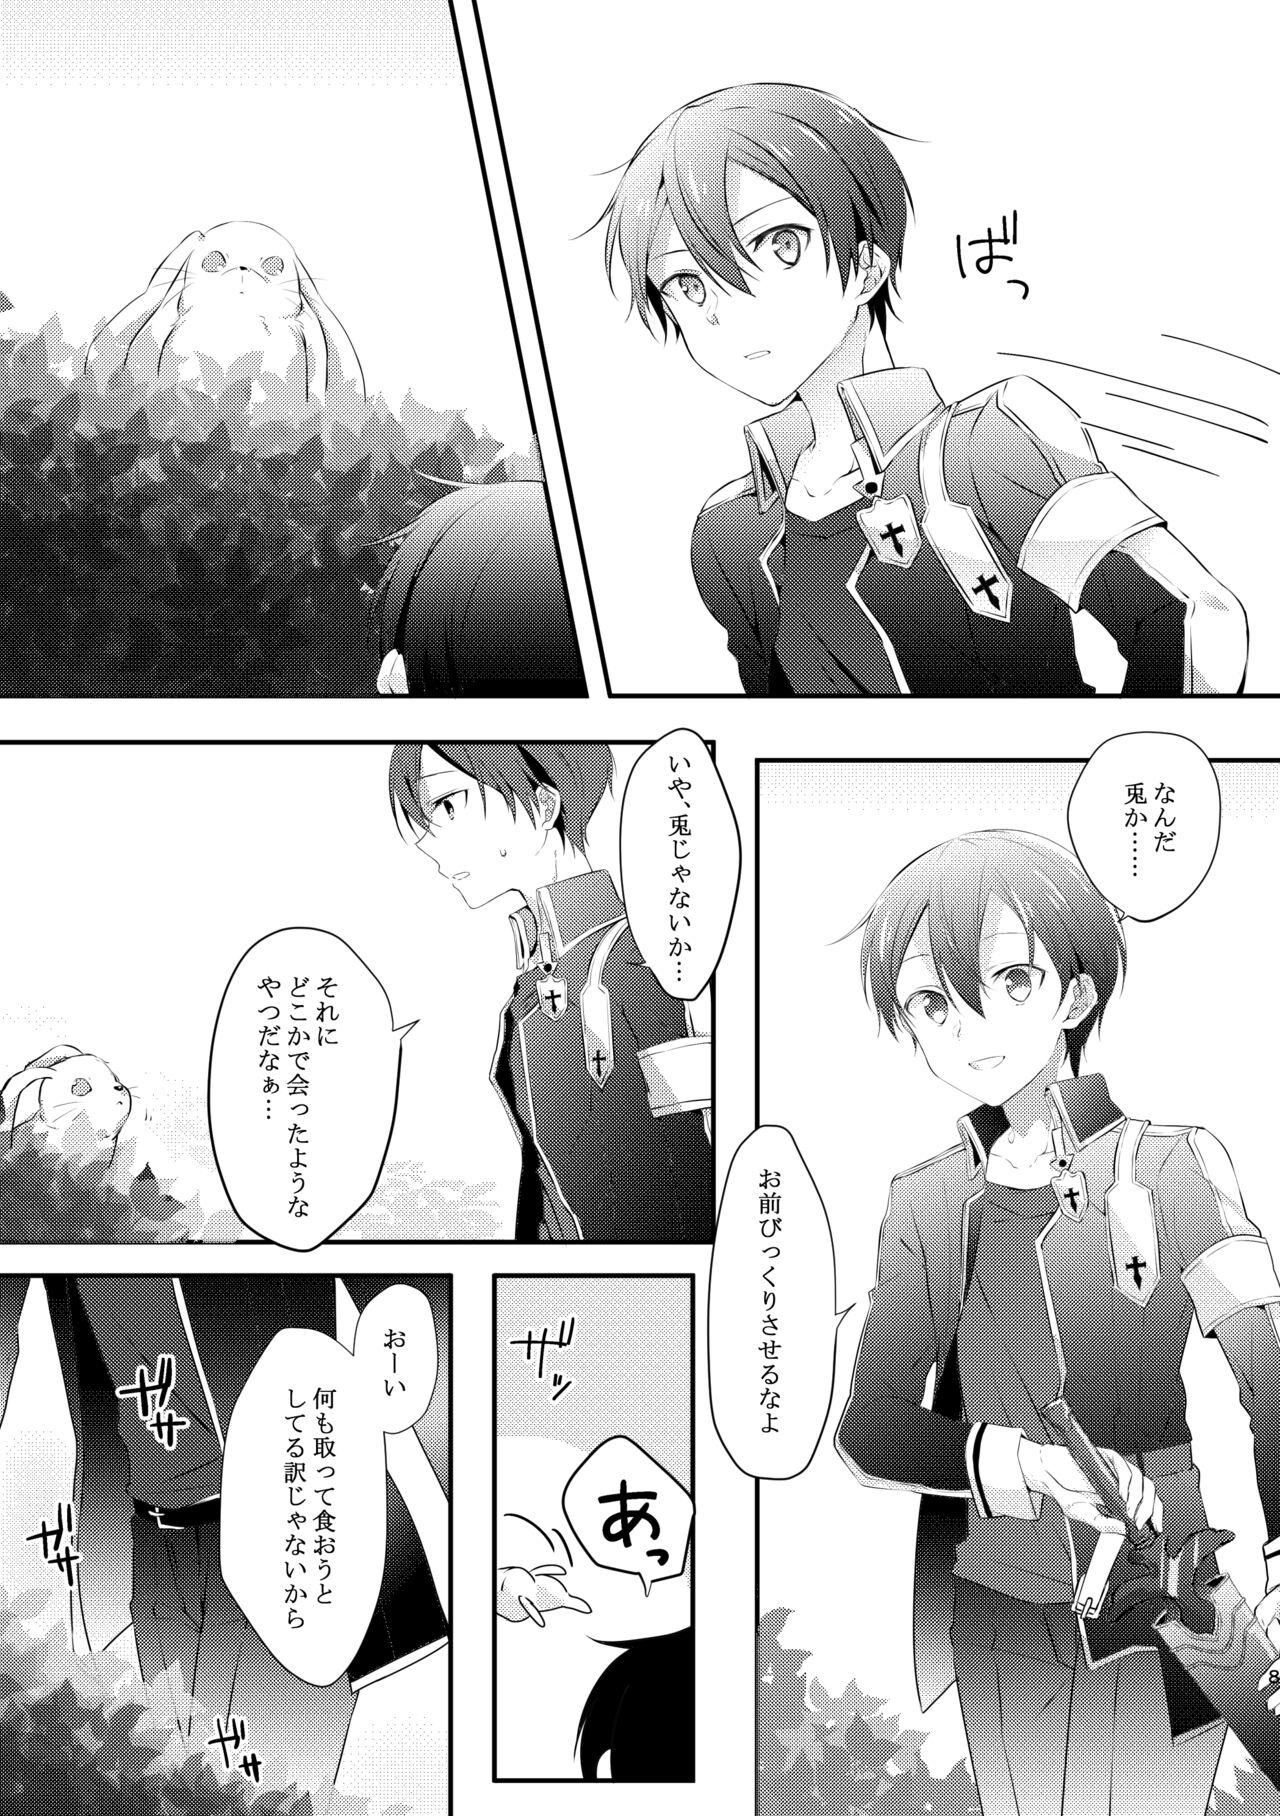 Para 触手ちゃんはユジキリが羨ましい！ - Sword art online Brother Sister - Page 7